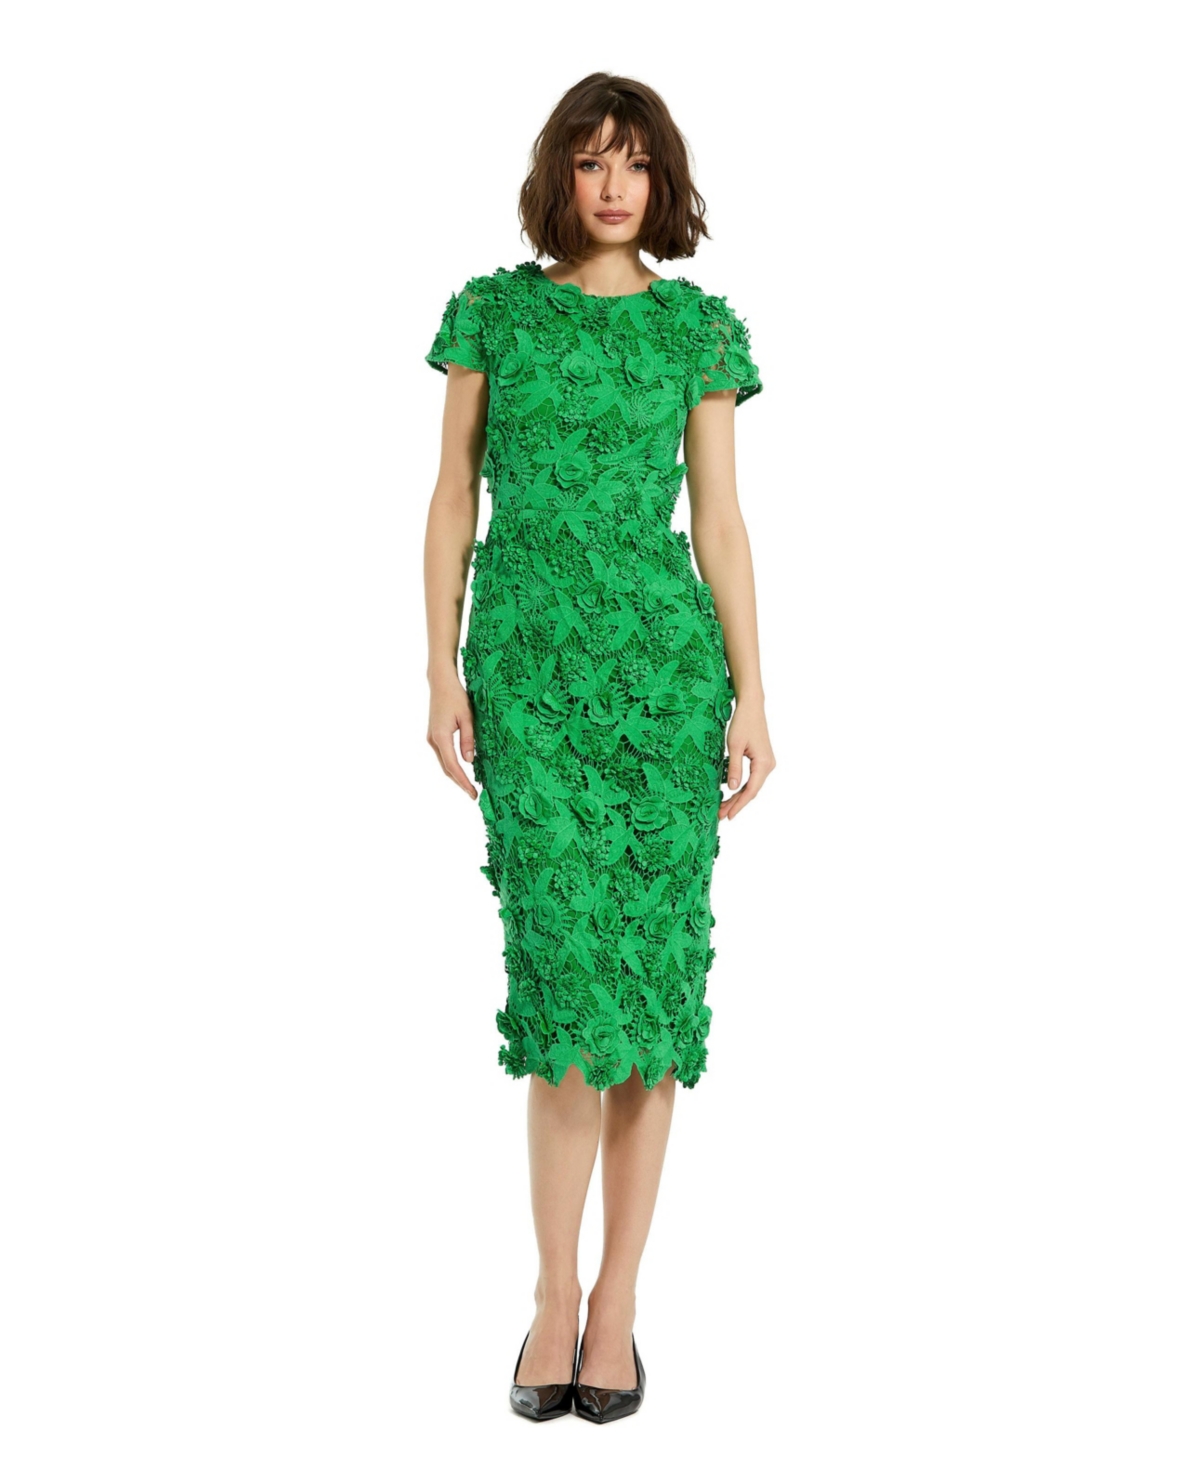 Women's Floral Lace Fitted Short Sleeve Midi Dress - Spring green